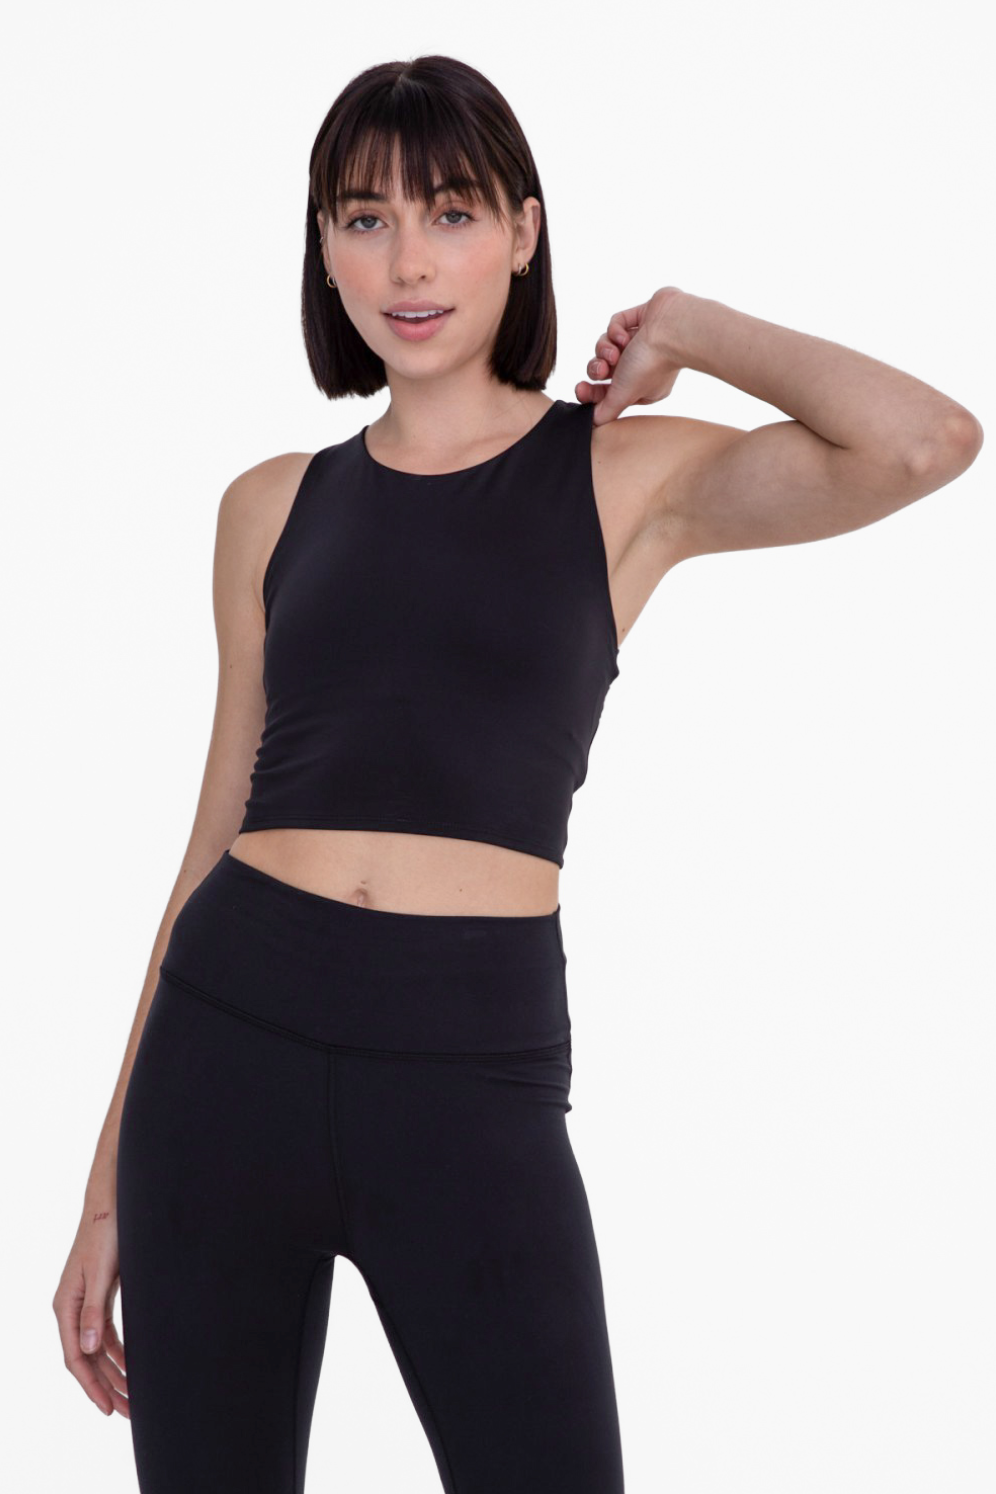 Strap Back Cropped Top with Built-In Sports Bra